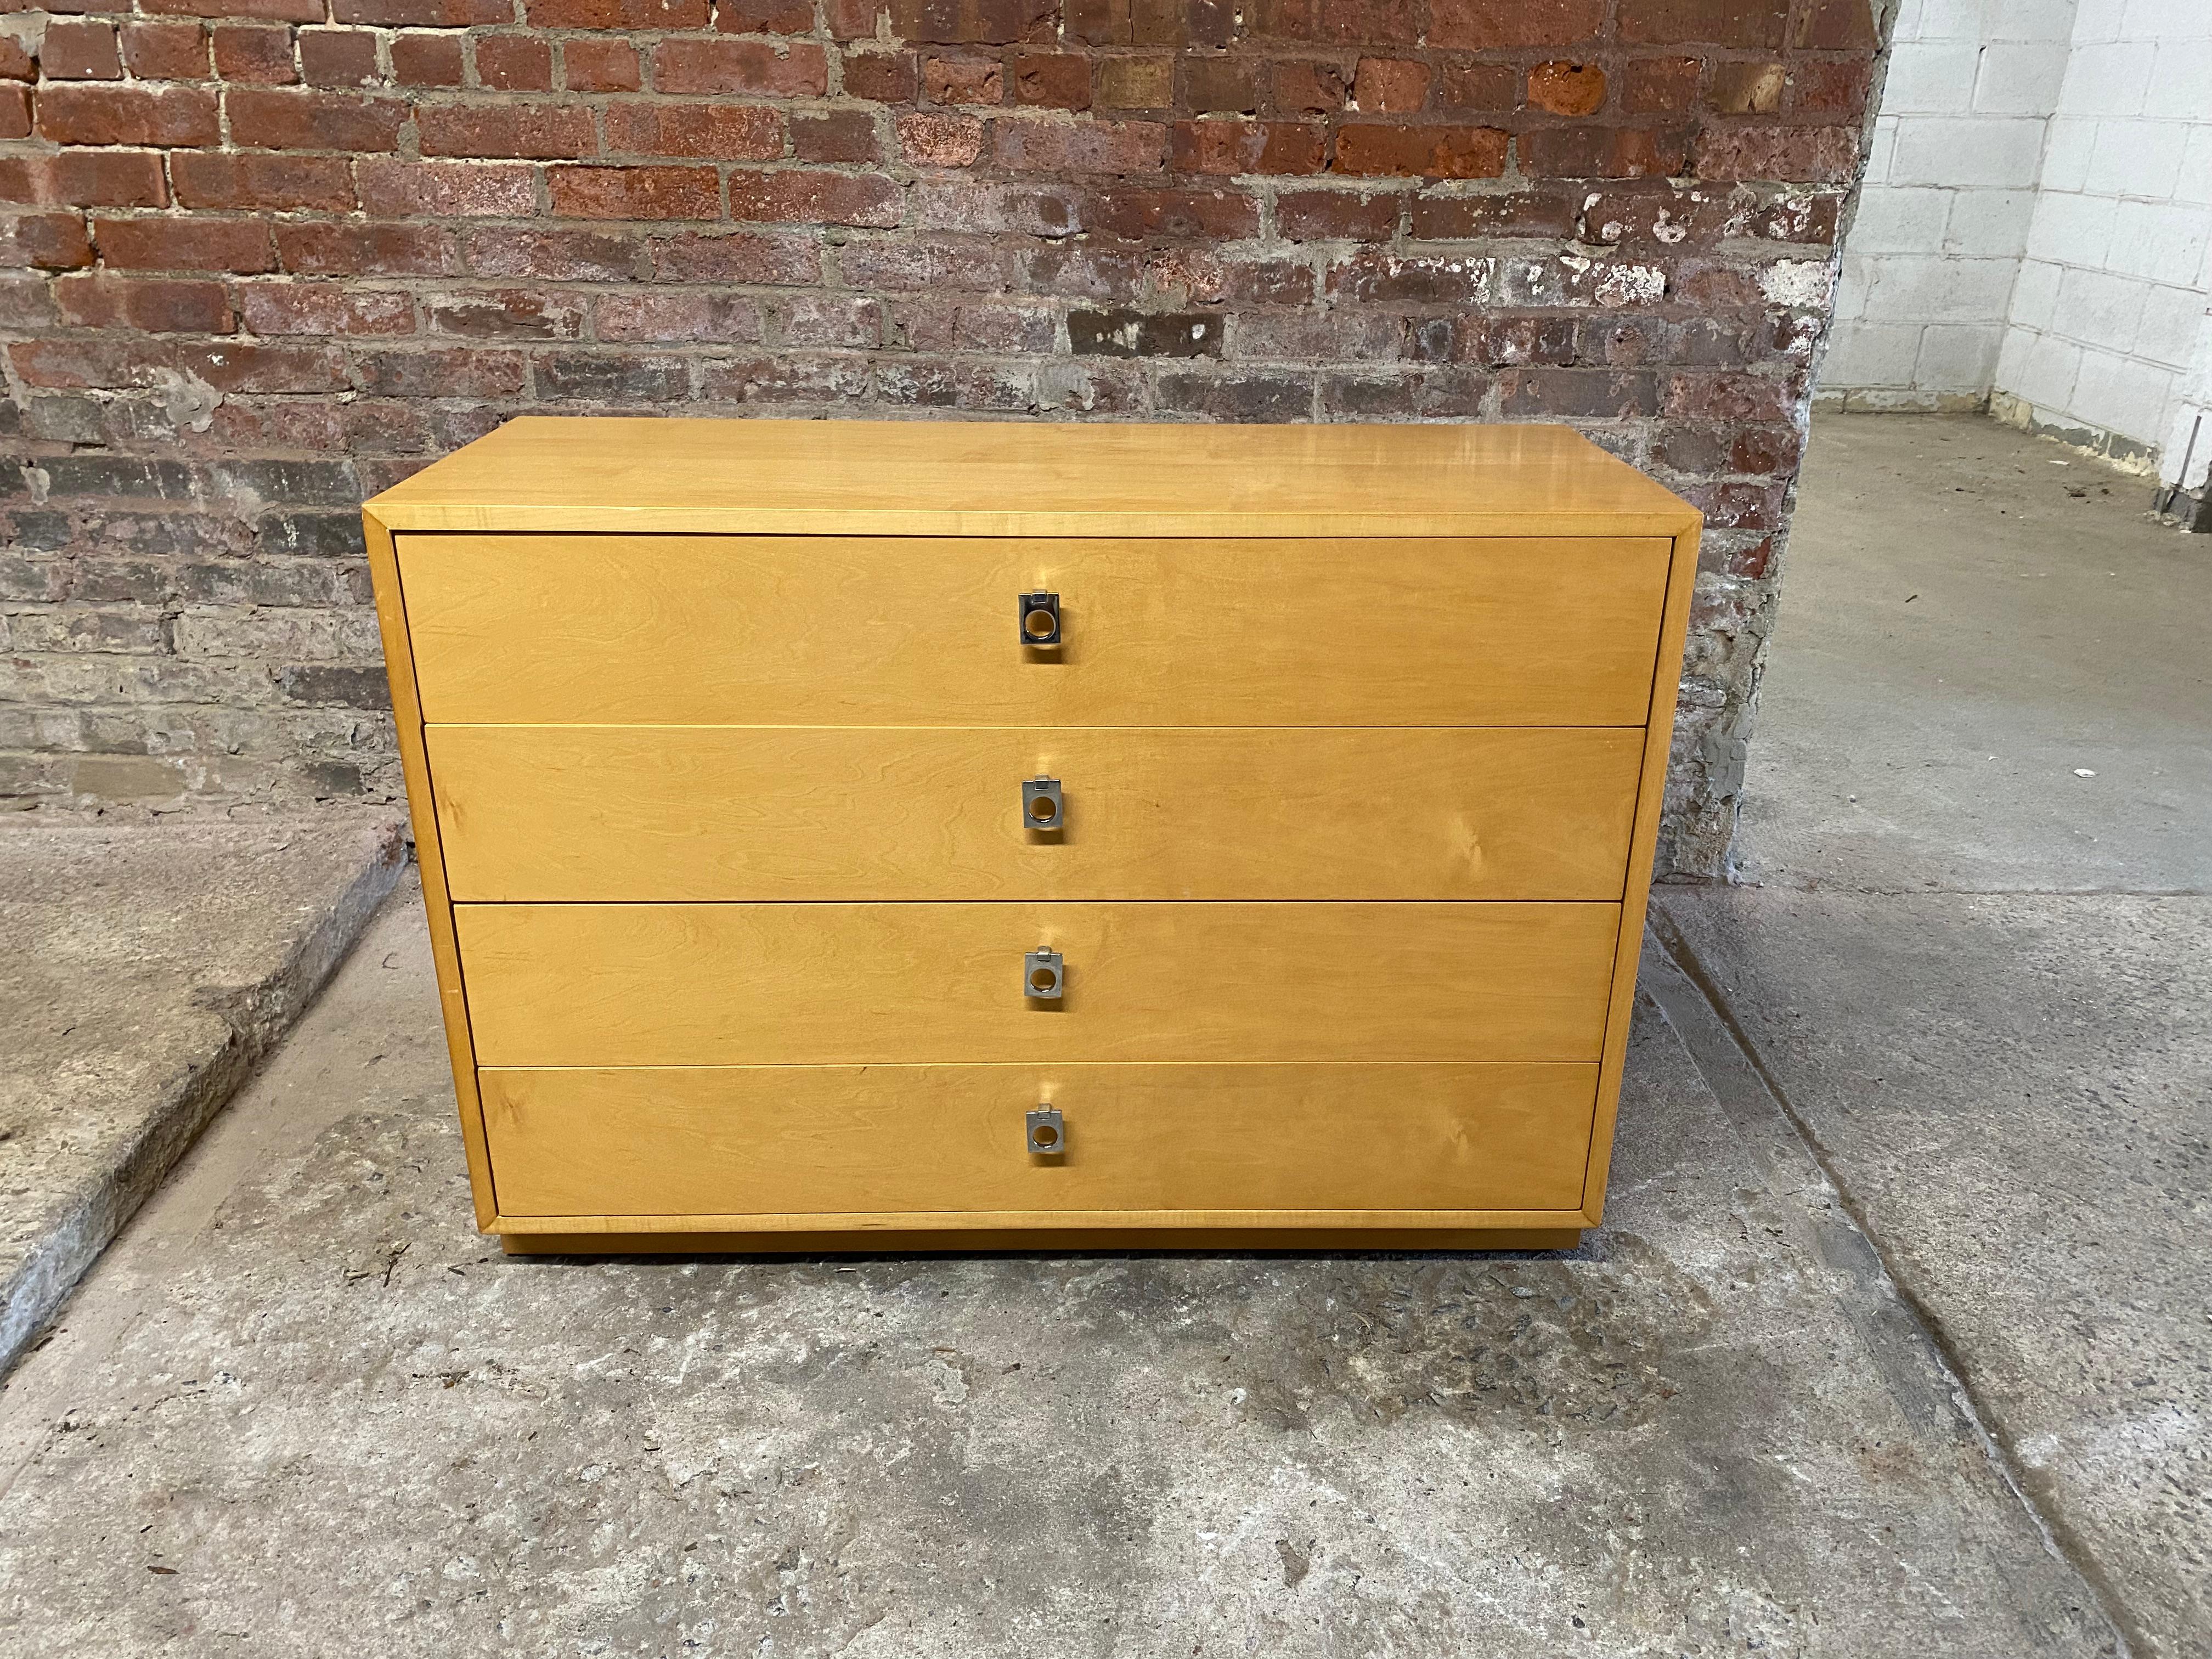 Founders four drawer maple dresser on a plinth base. Chrome drop pulls. Very clean interiors. Circa 1970-80. Signed in top drawer.

Very good condition with some minor scratches and surface abrasions. Original finish.

Approximately 15.5